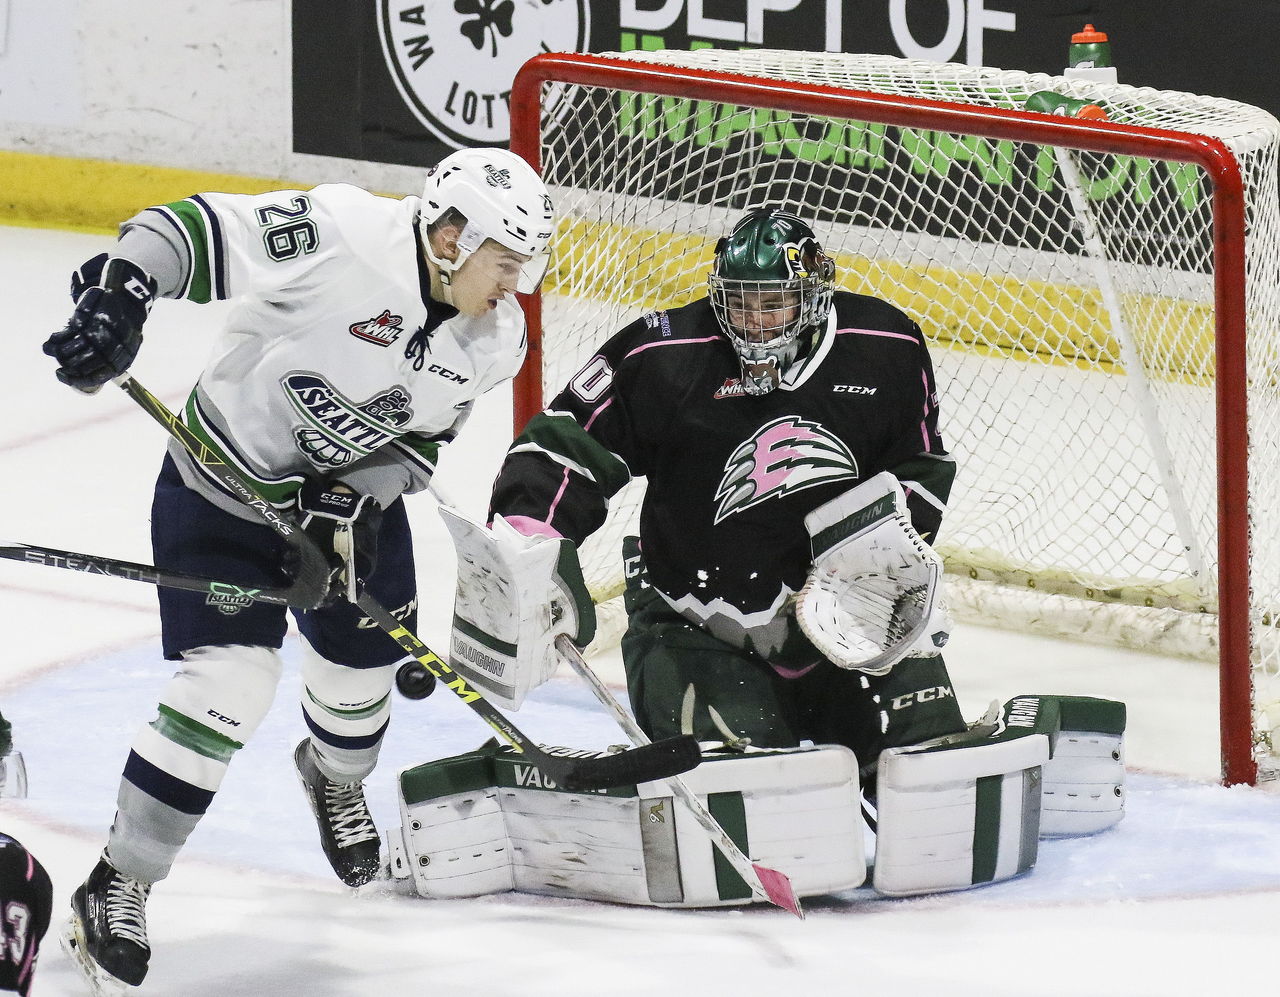 Seattle’s Nolan Volcan (26) challenges Everett goaltender Carter Hart during a game in October at Xfinity Arena.